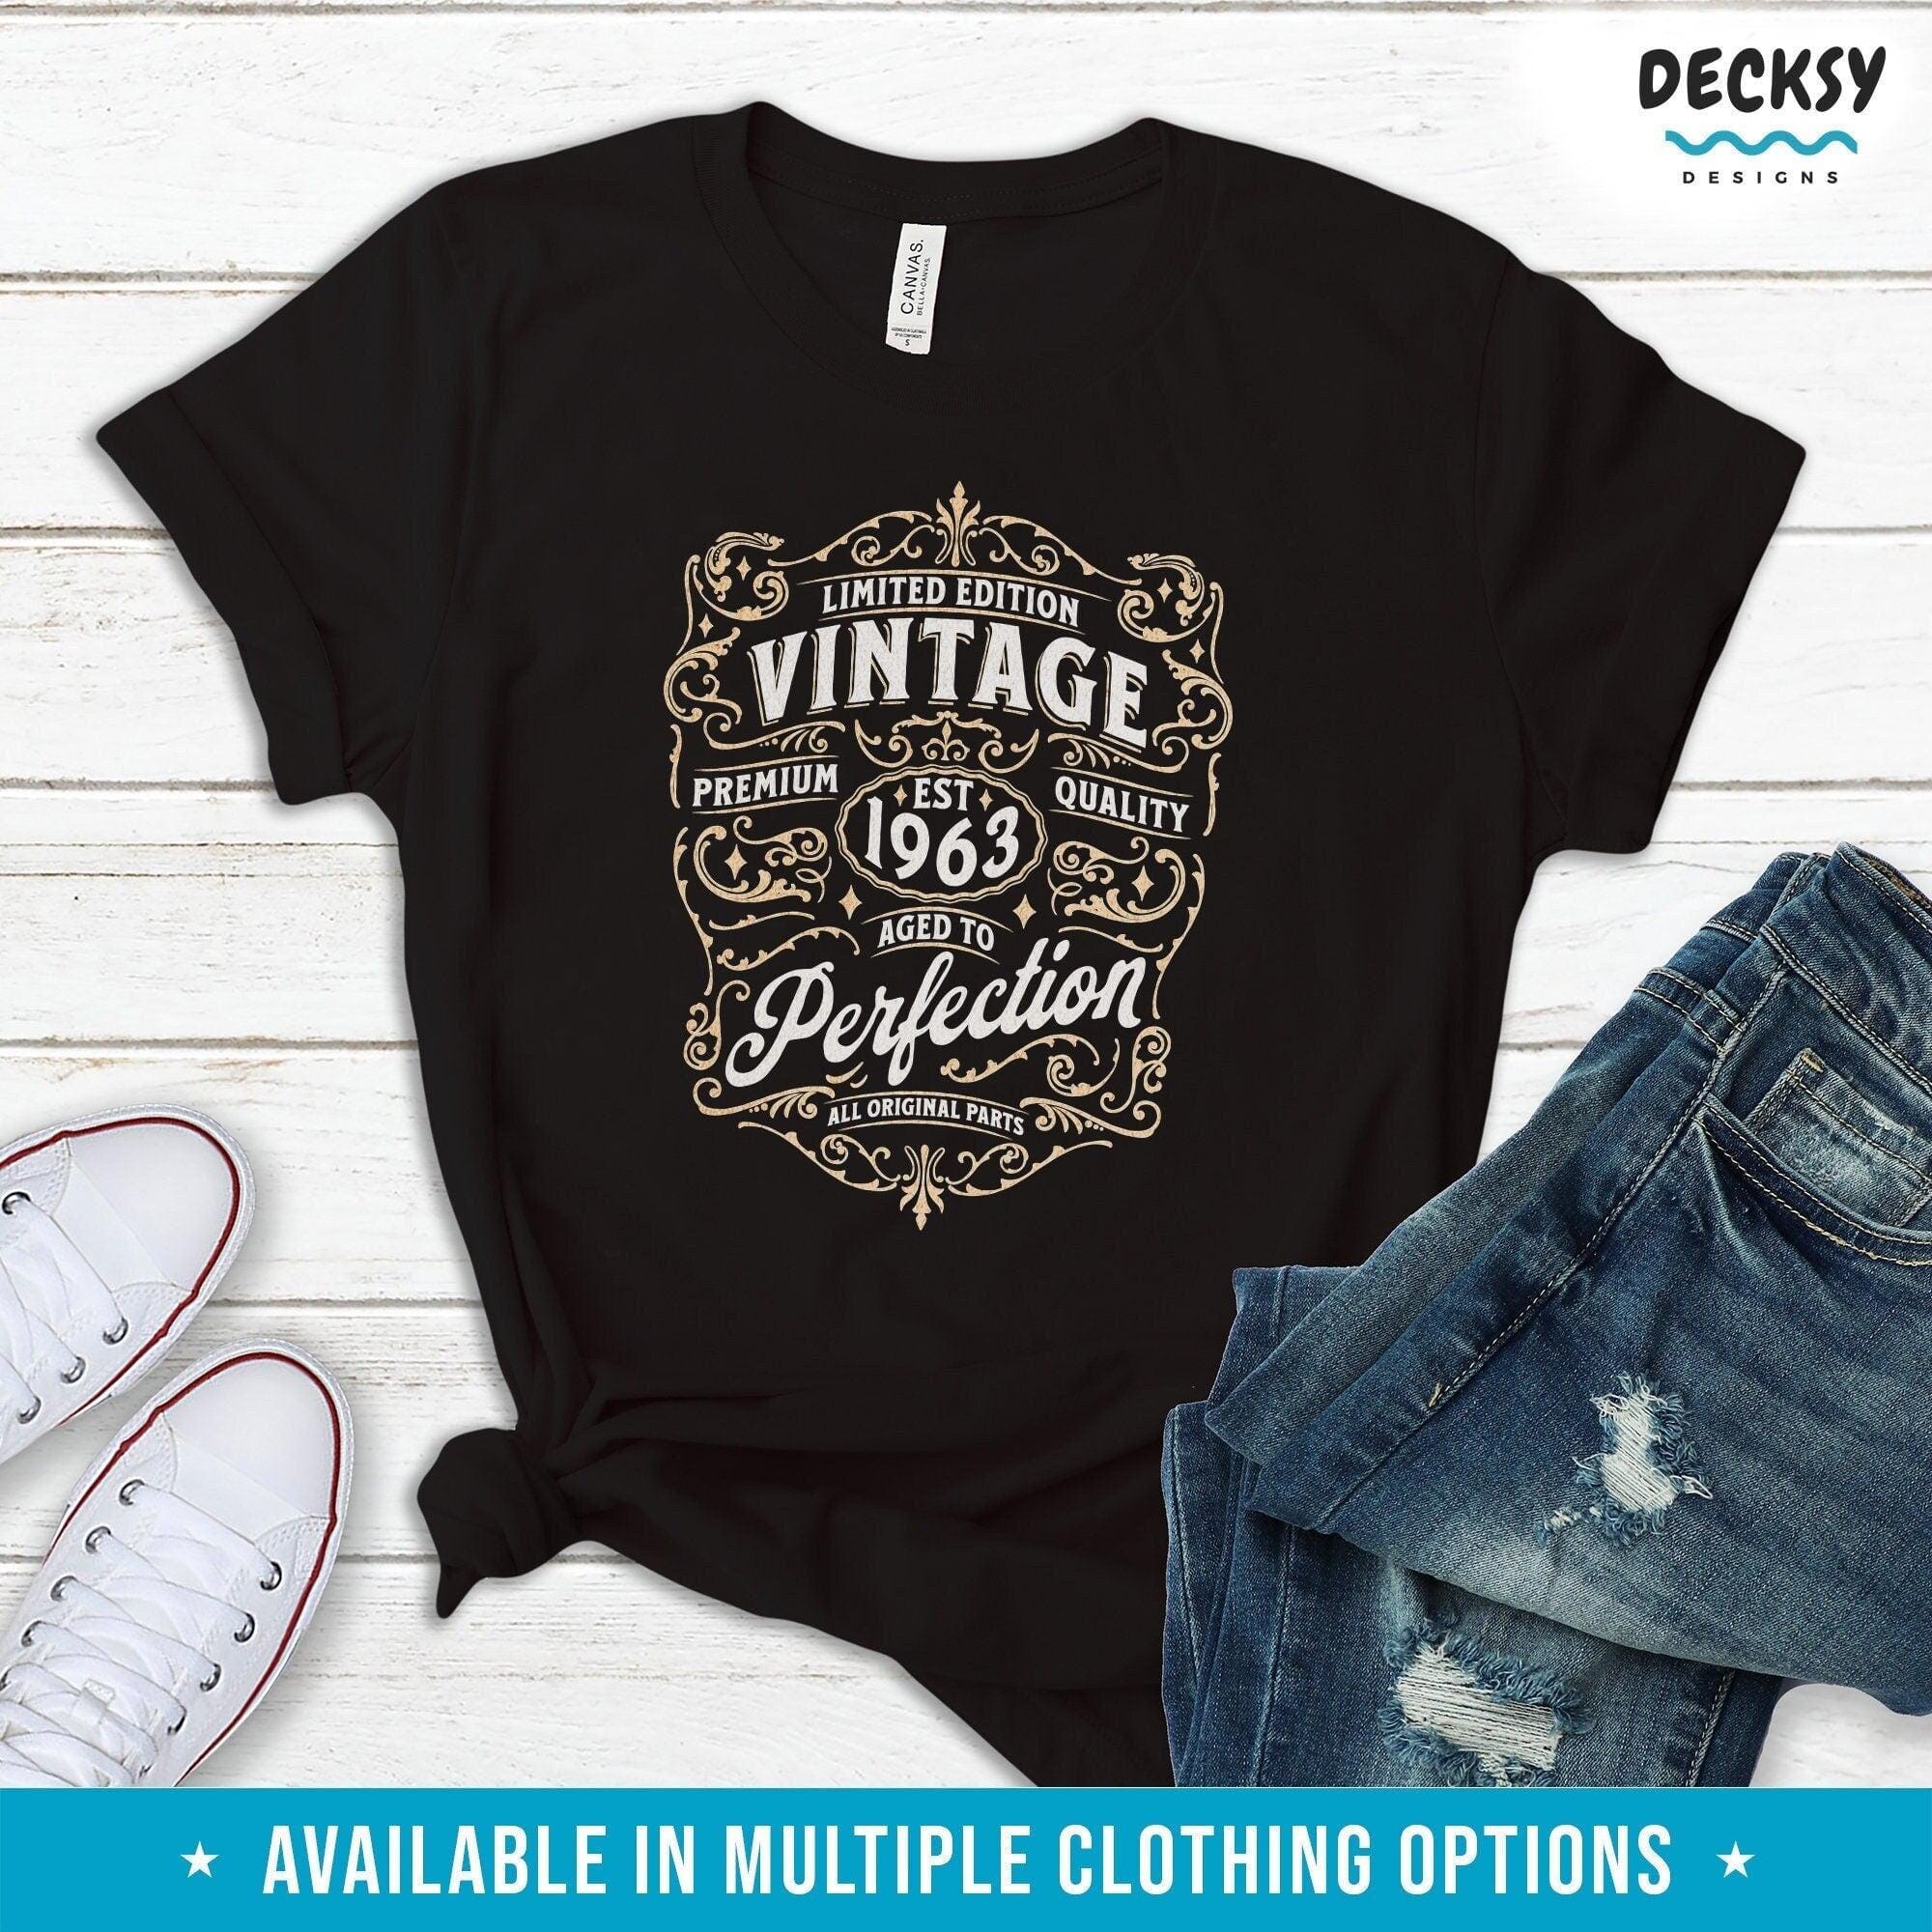 60th Birthday T-Shirt Gift, Vintage 1963 Aged To Perfection Tee-Clothing:Gender-Neutral Adult Clothing:Tops & Tees:T-shirts:Graphic Tees-DecksyDesigns